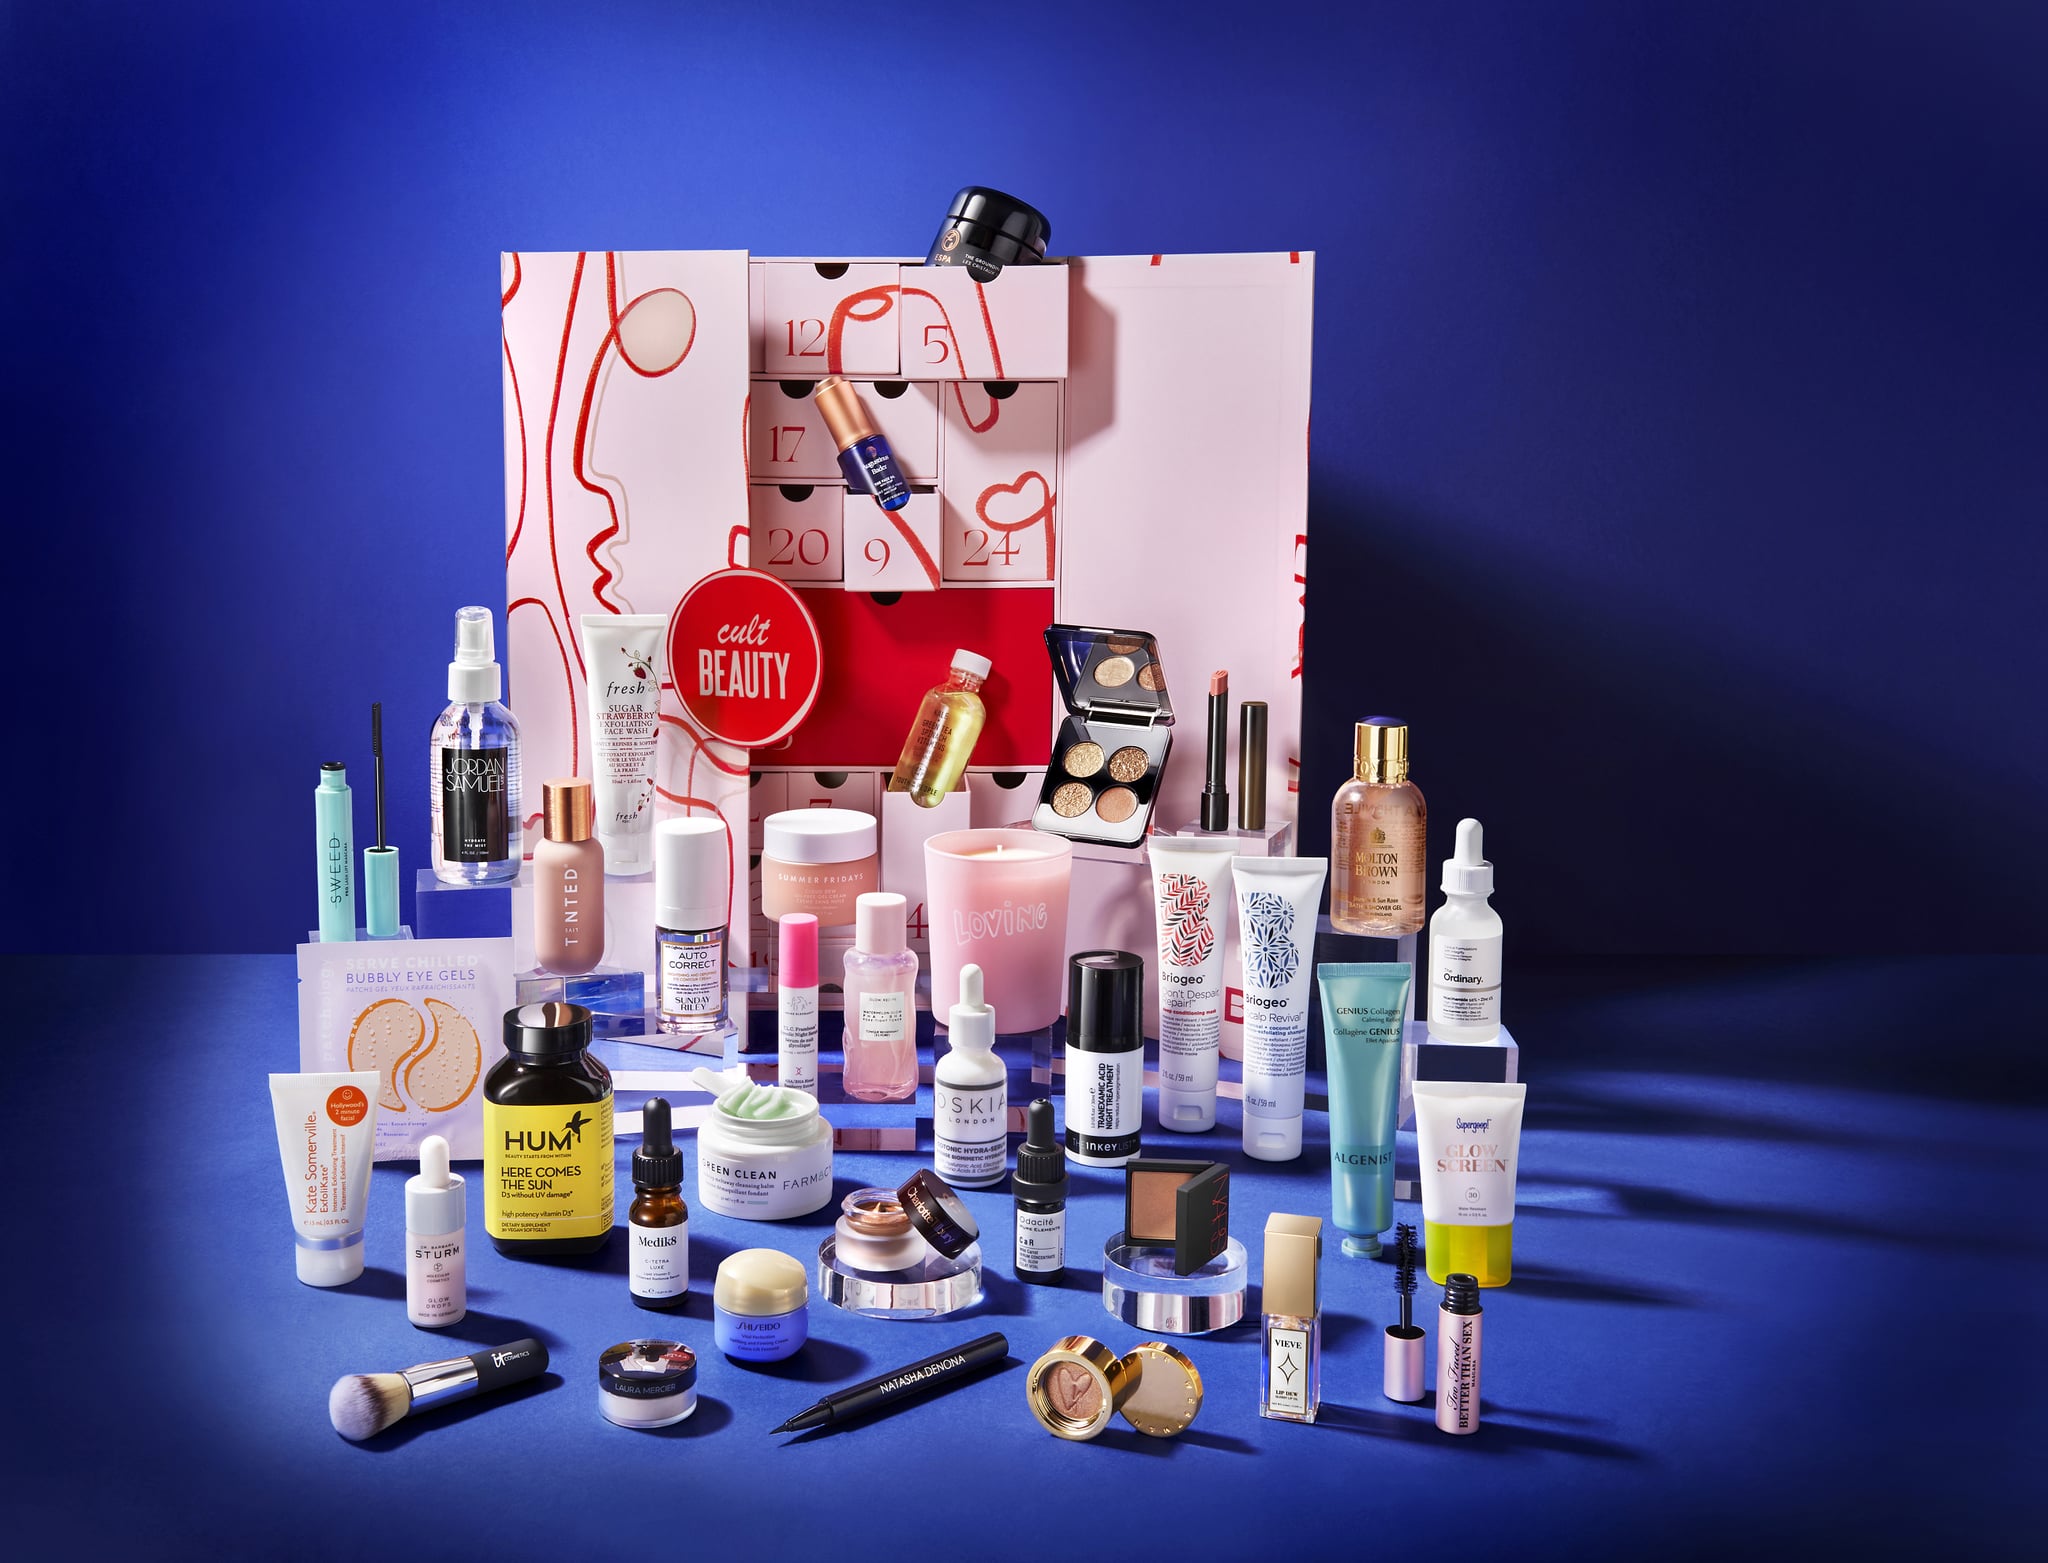 debenhams-launches-beauty-advent-calendar-packed-with-cult-items-my